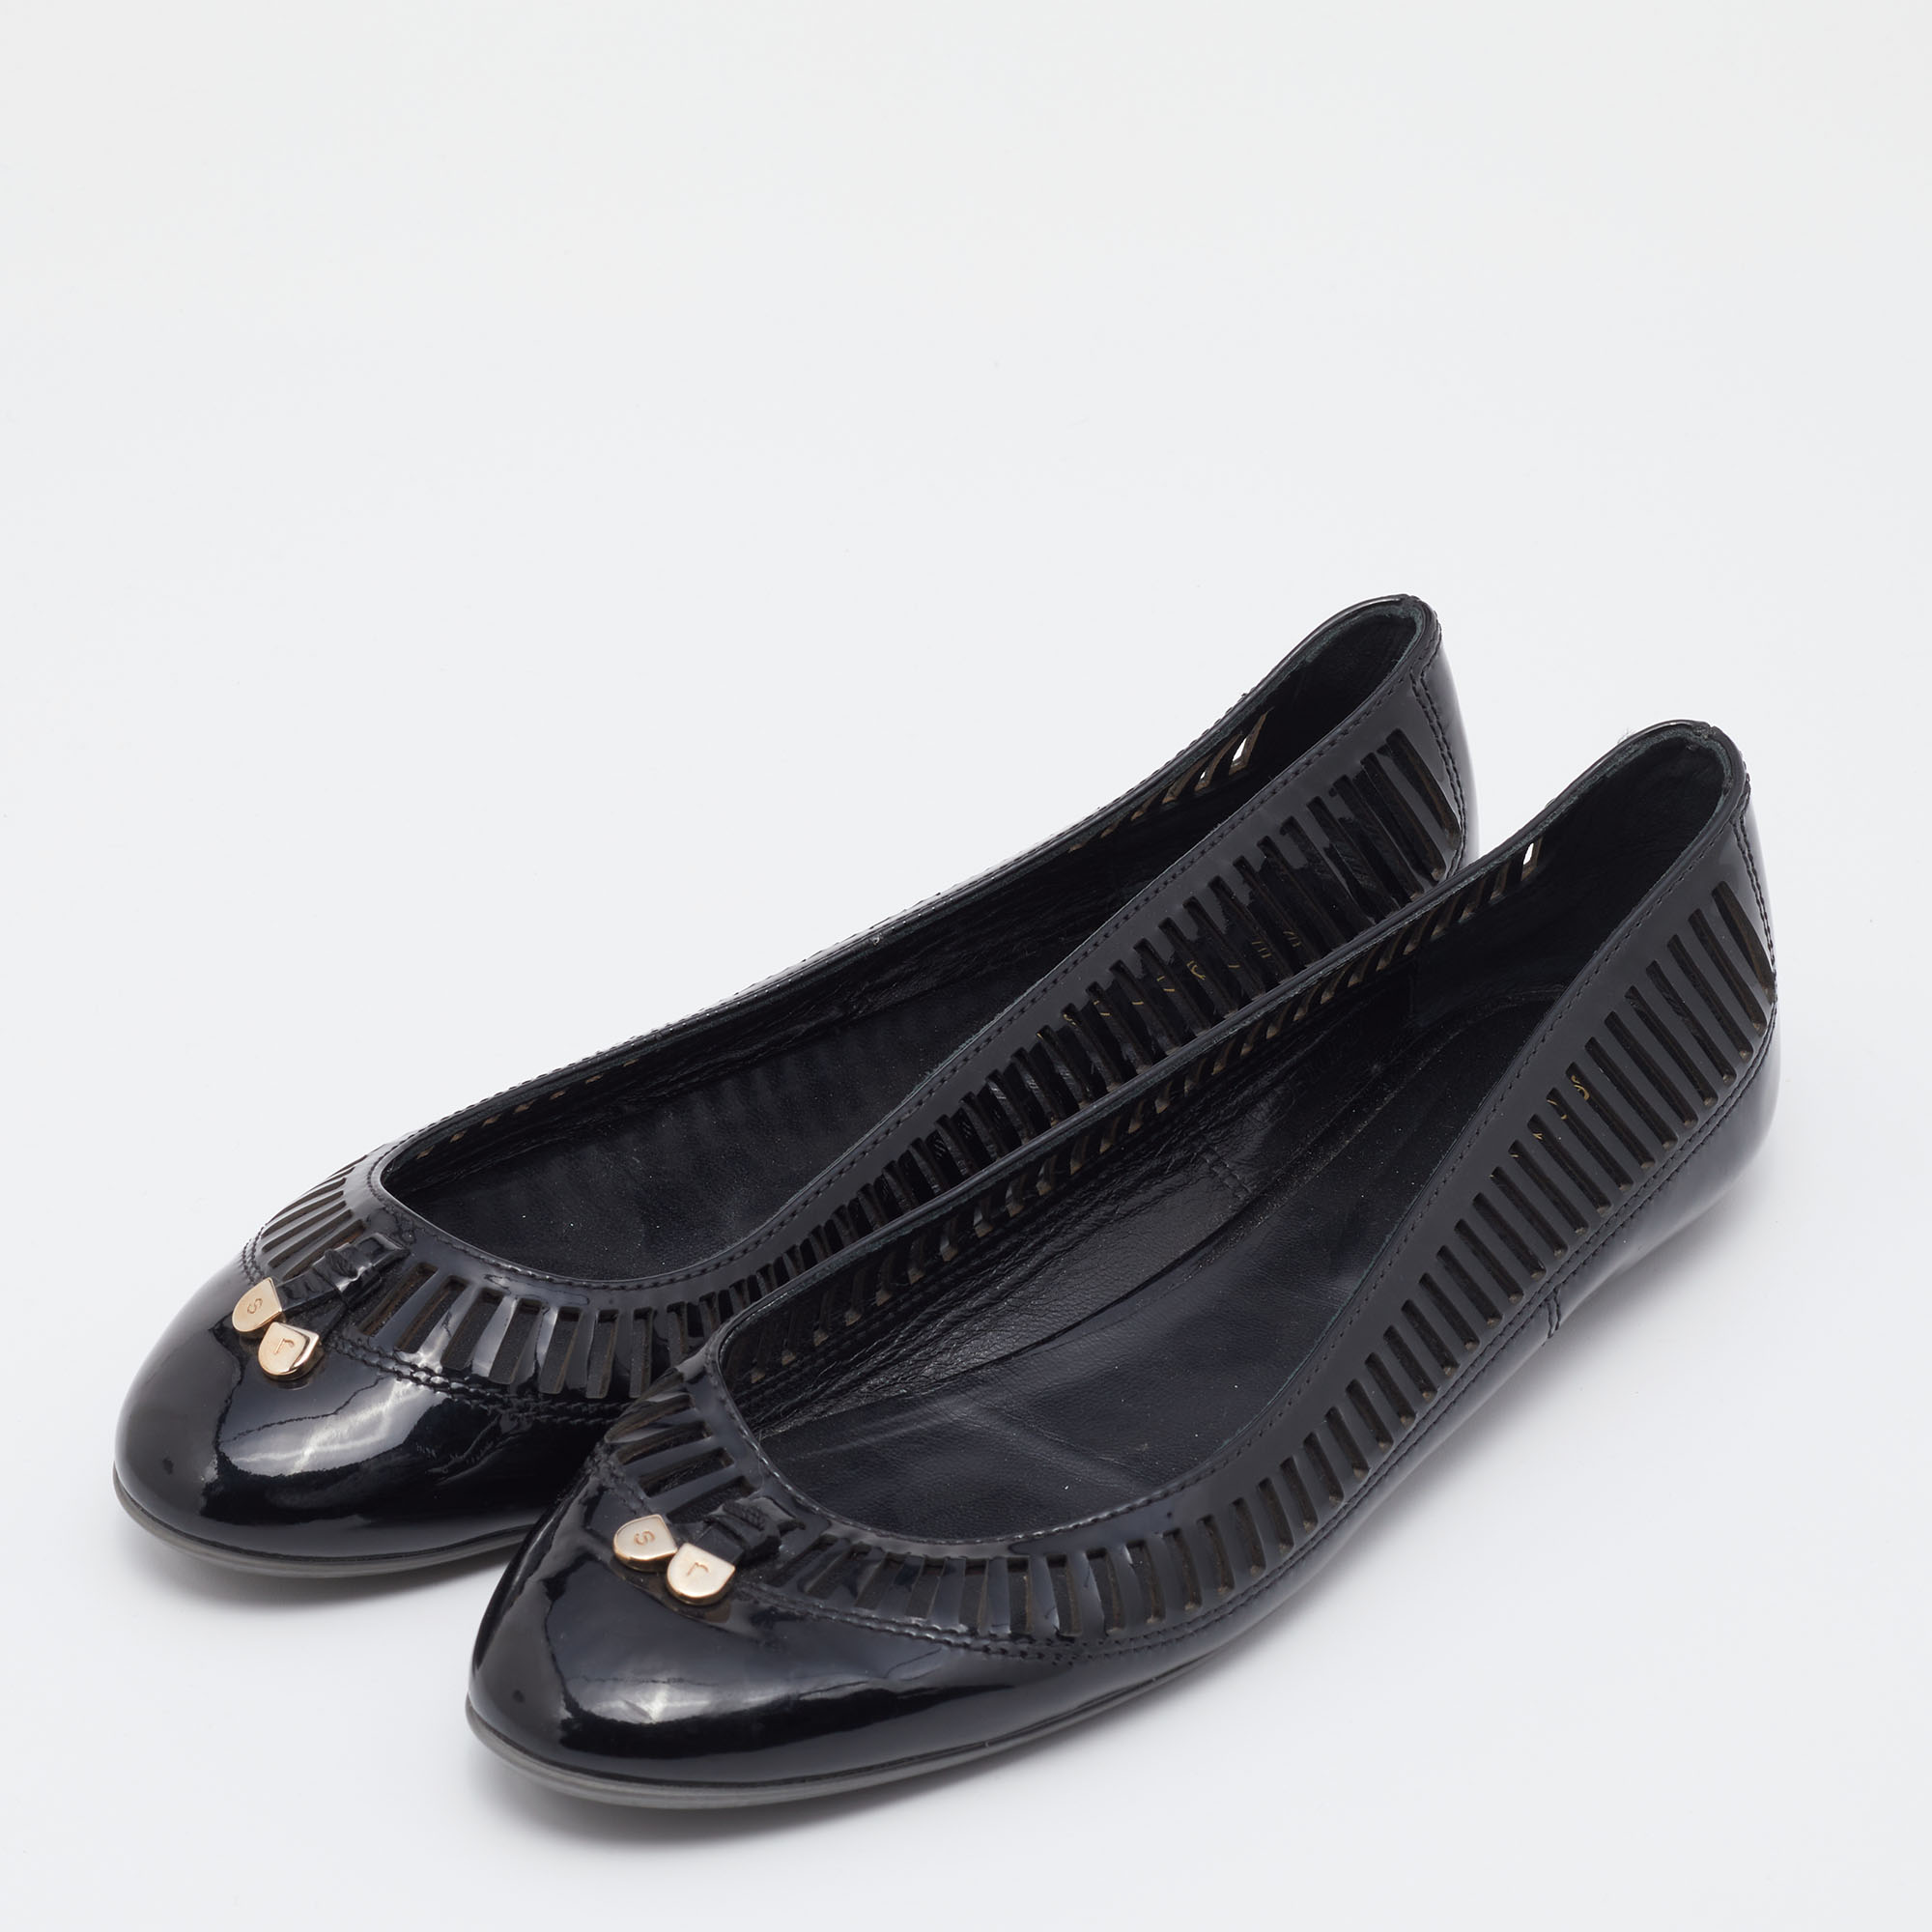 

Sergio Rossi Black Laser Cut Patent Leather Ballet Flats Size